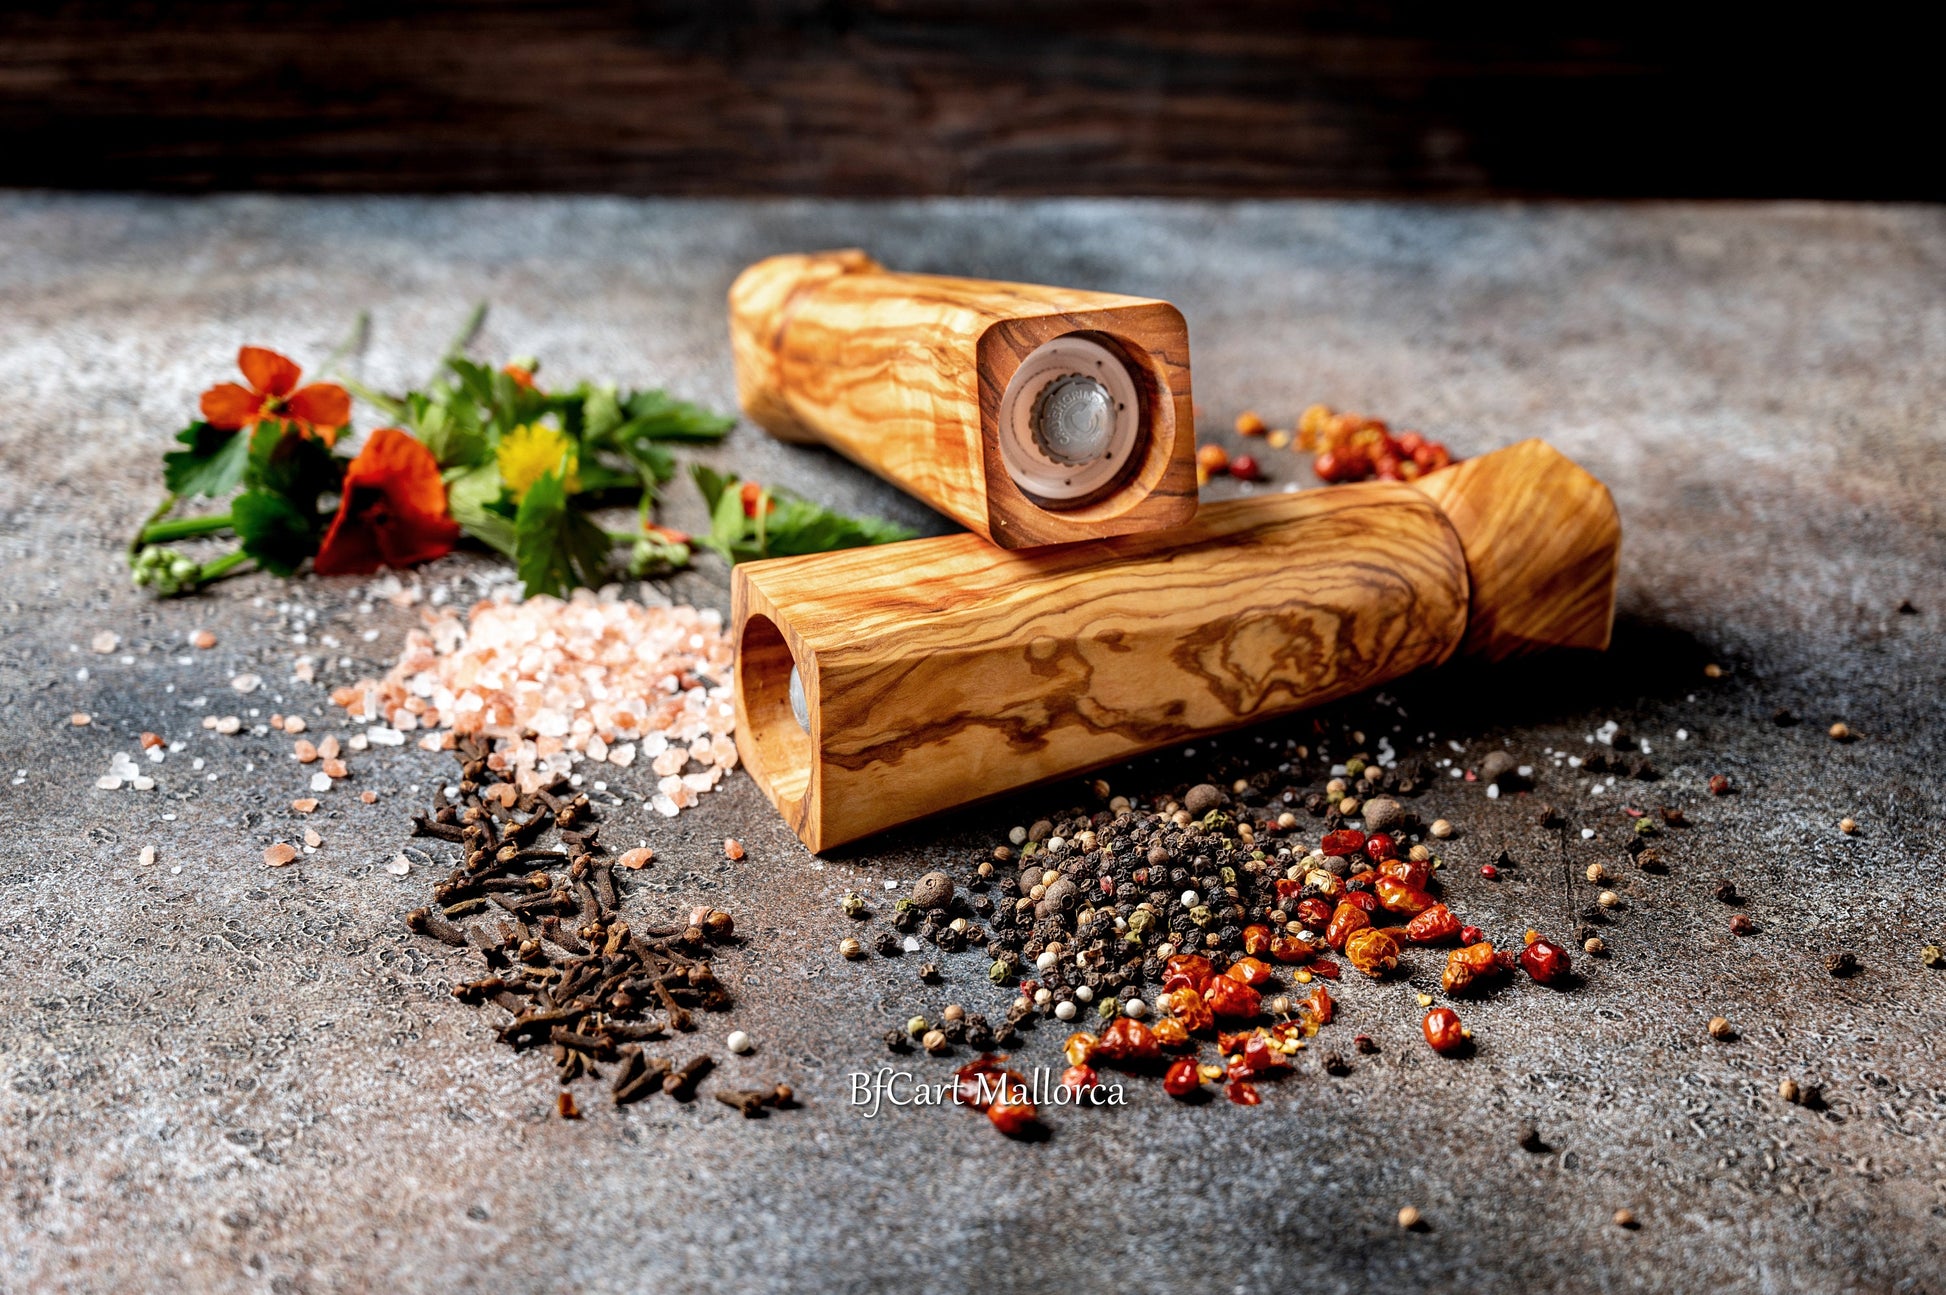 Pepper grinder olive wood with plate, Pepper shakers parts with ceramic grinding system, pepper grinder with tray